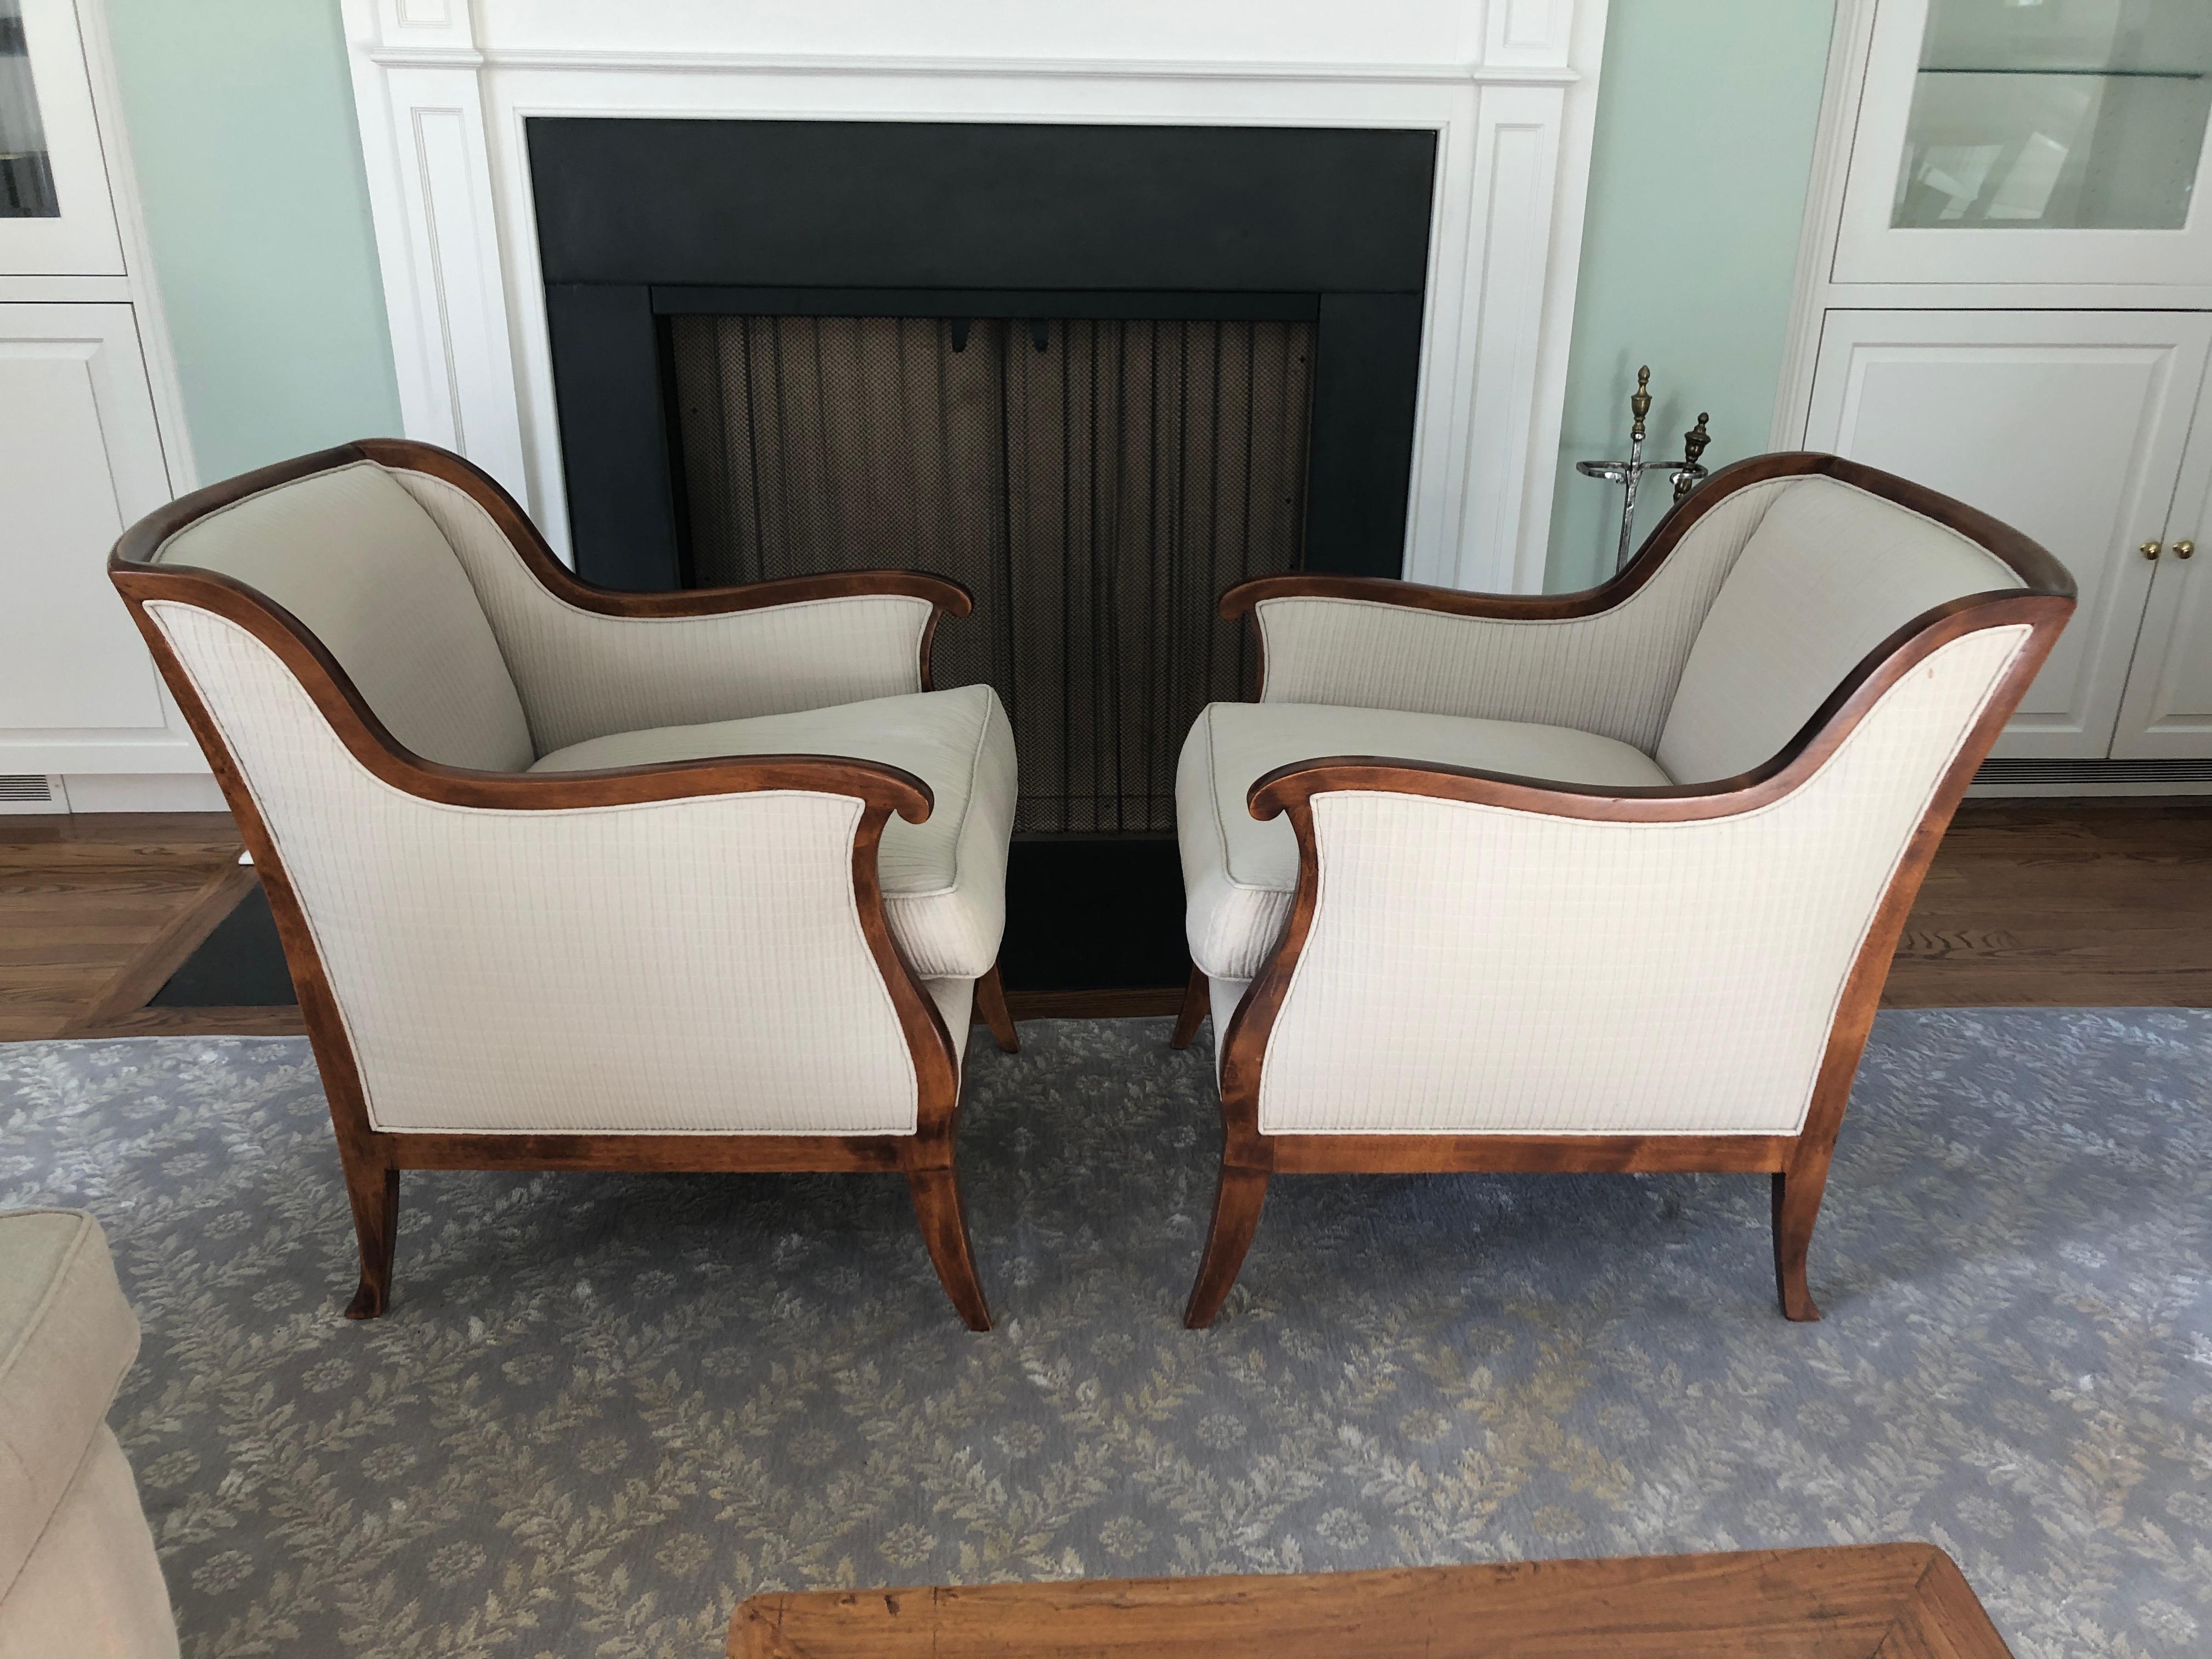 Elegant Pair of Mahogany and Upholstered French Vintage Club Chairs (Polster)